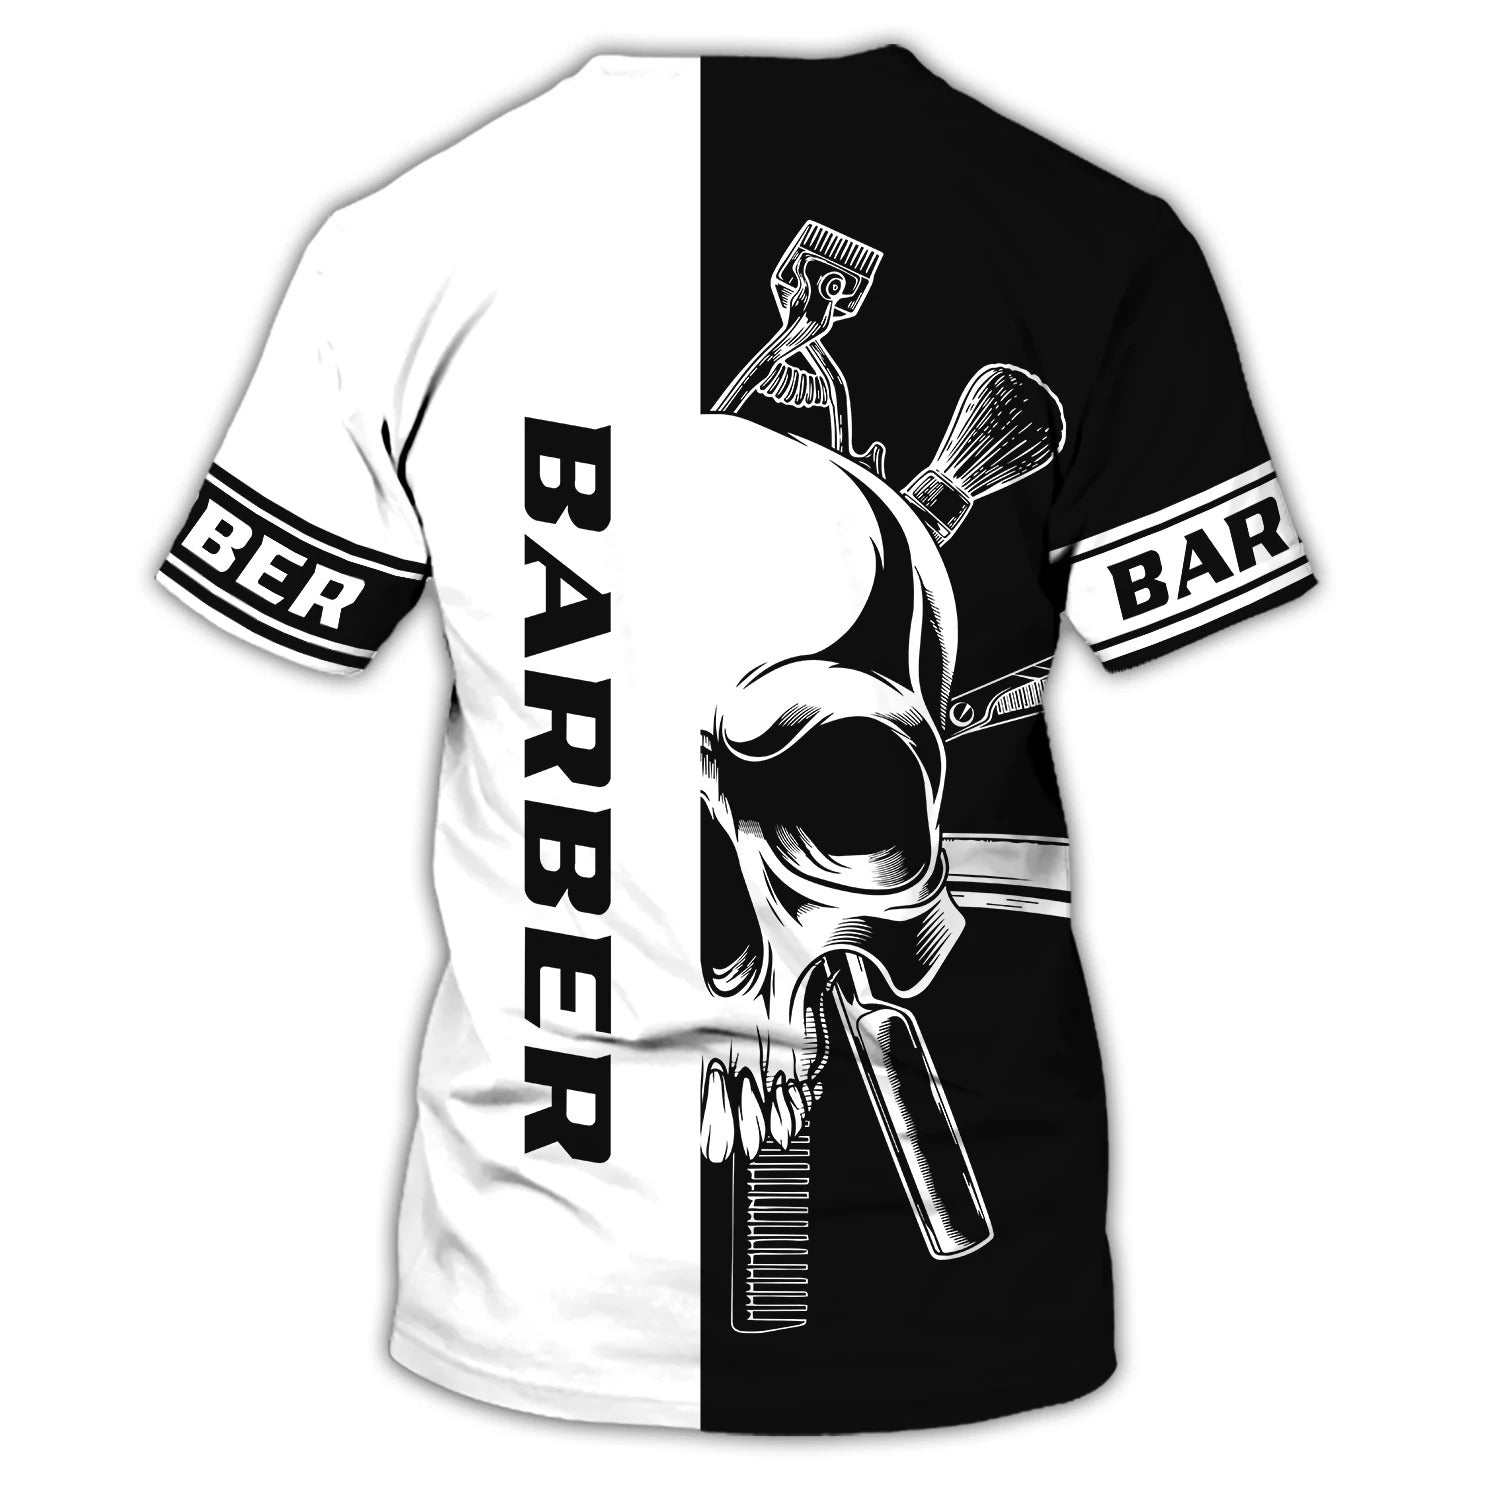 Personalized Skull Shirt For Barber/ Being A Barber Man 3D Tshirt/ Barber Shirts With Leather Pattern